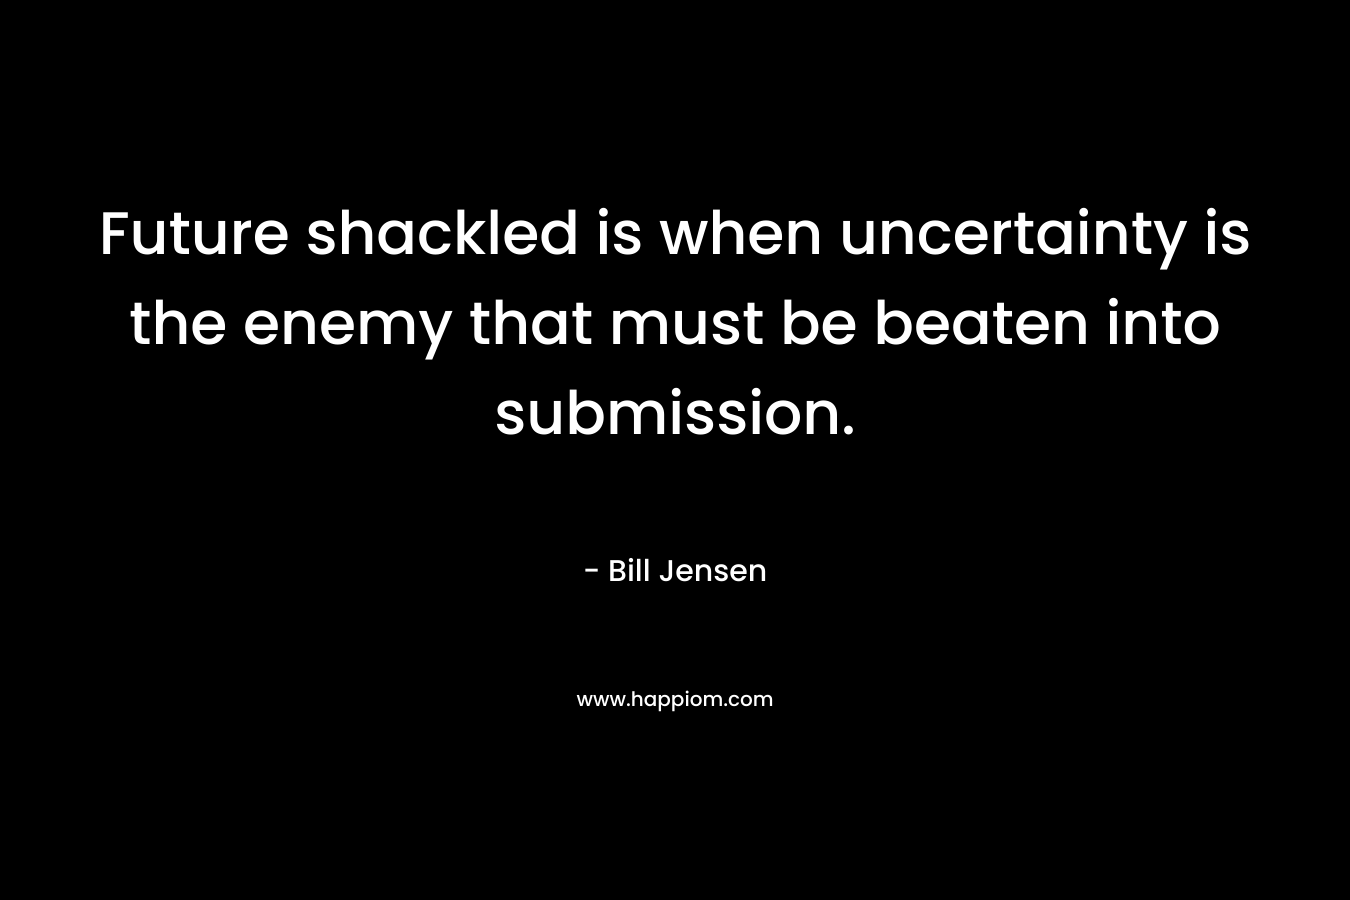 Future shackled is when uncertainty is the enemy that must be beaten into submission.